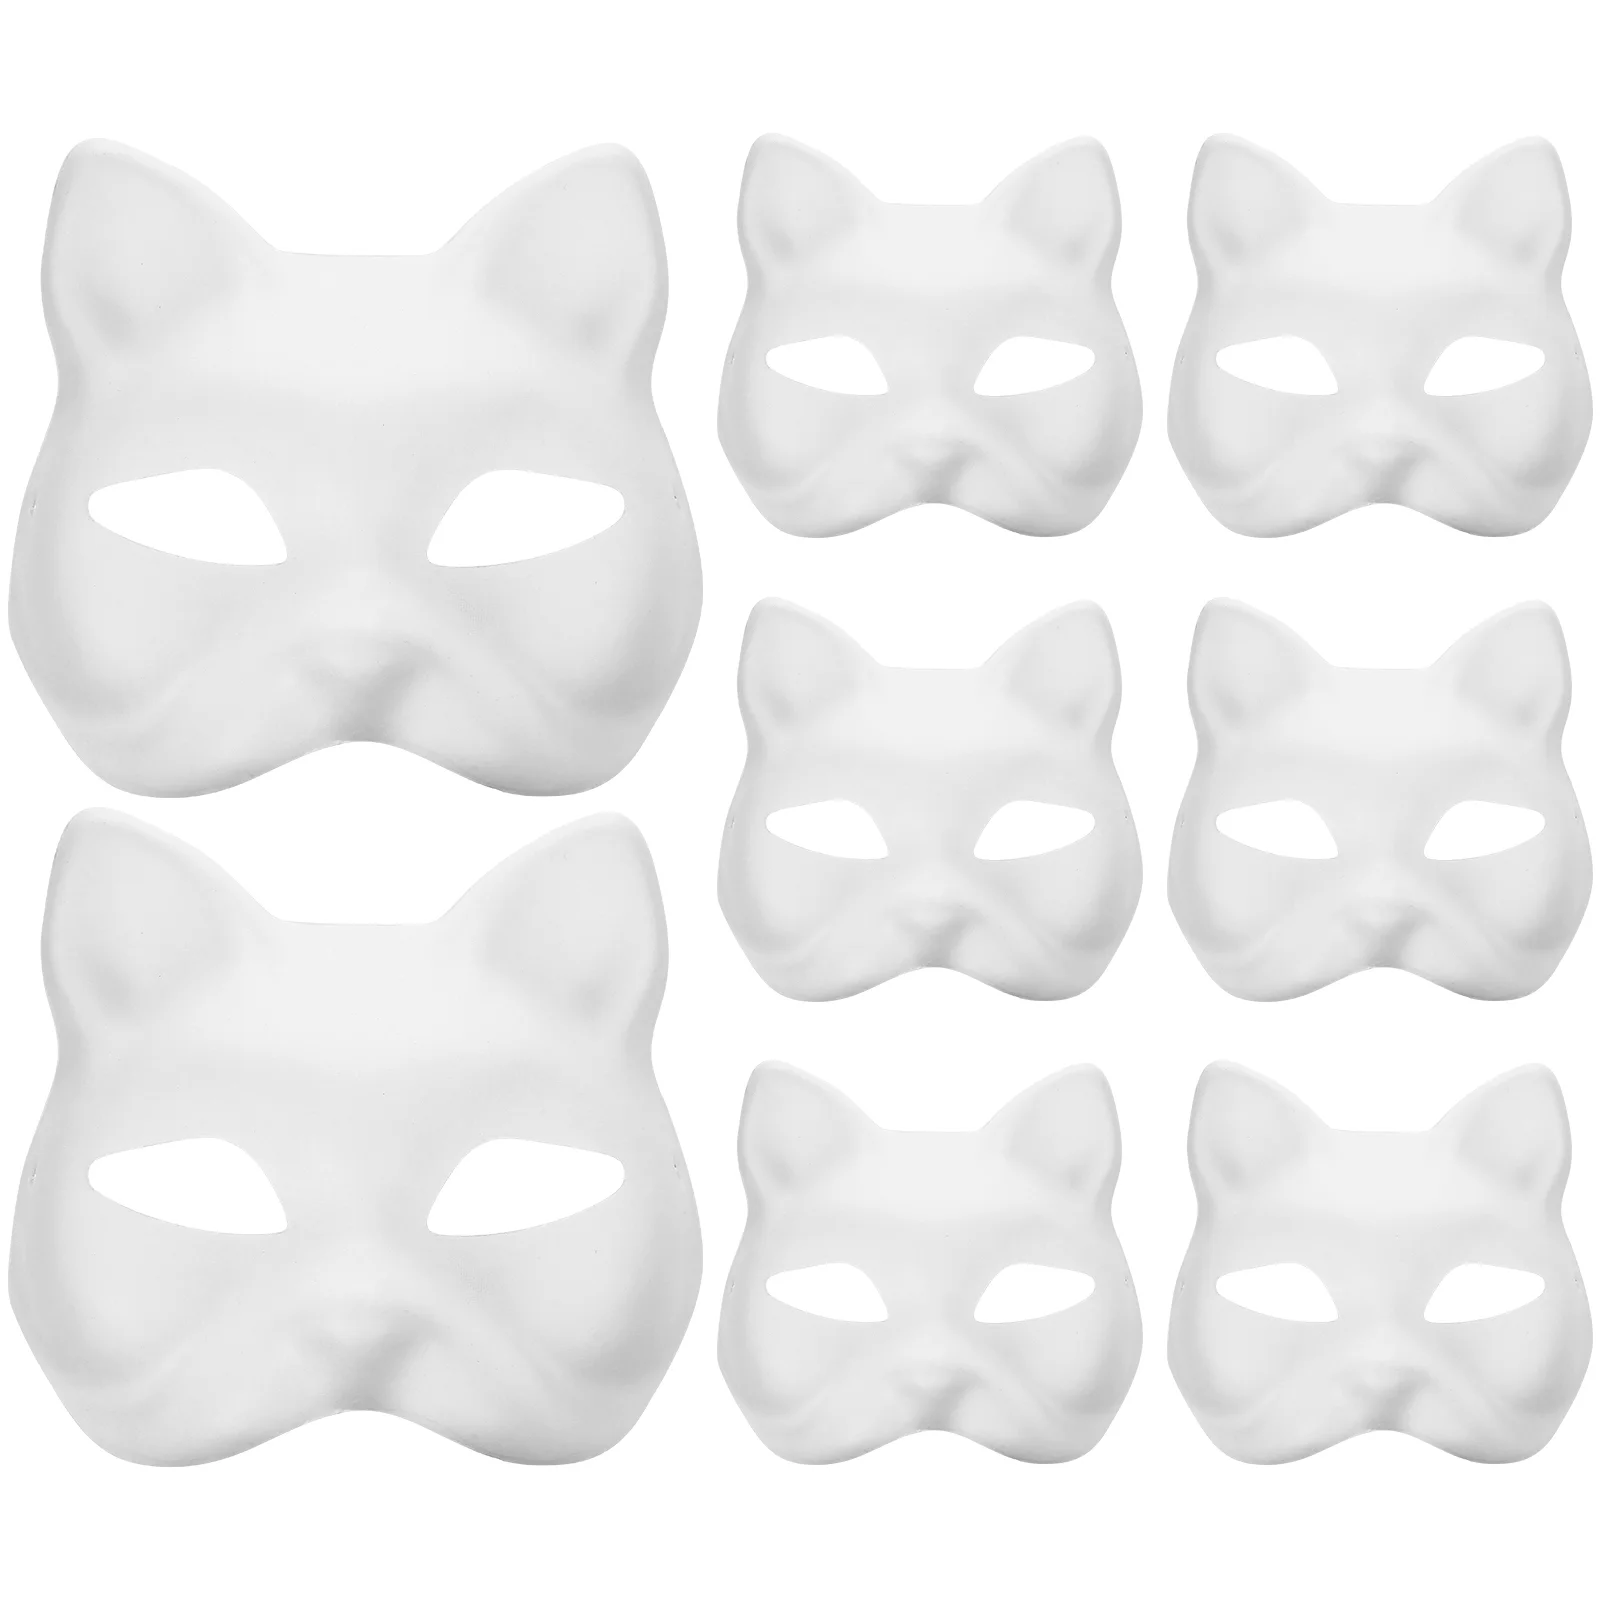 

8 Pcs Pulp Blank Mask Cosplay Accessories Paintable Animal The Gift Decorate White Cat DIY Unpainted Paper Child